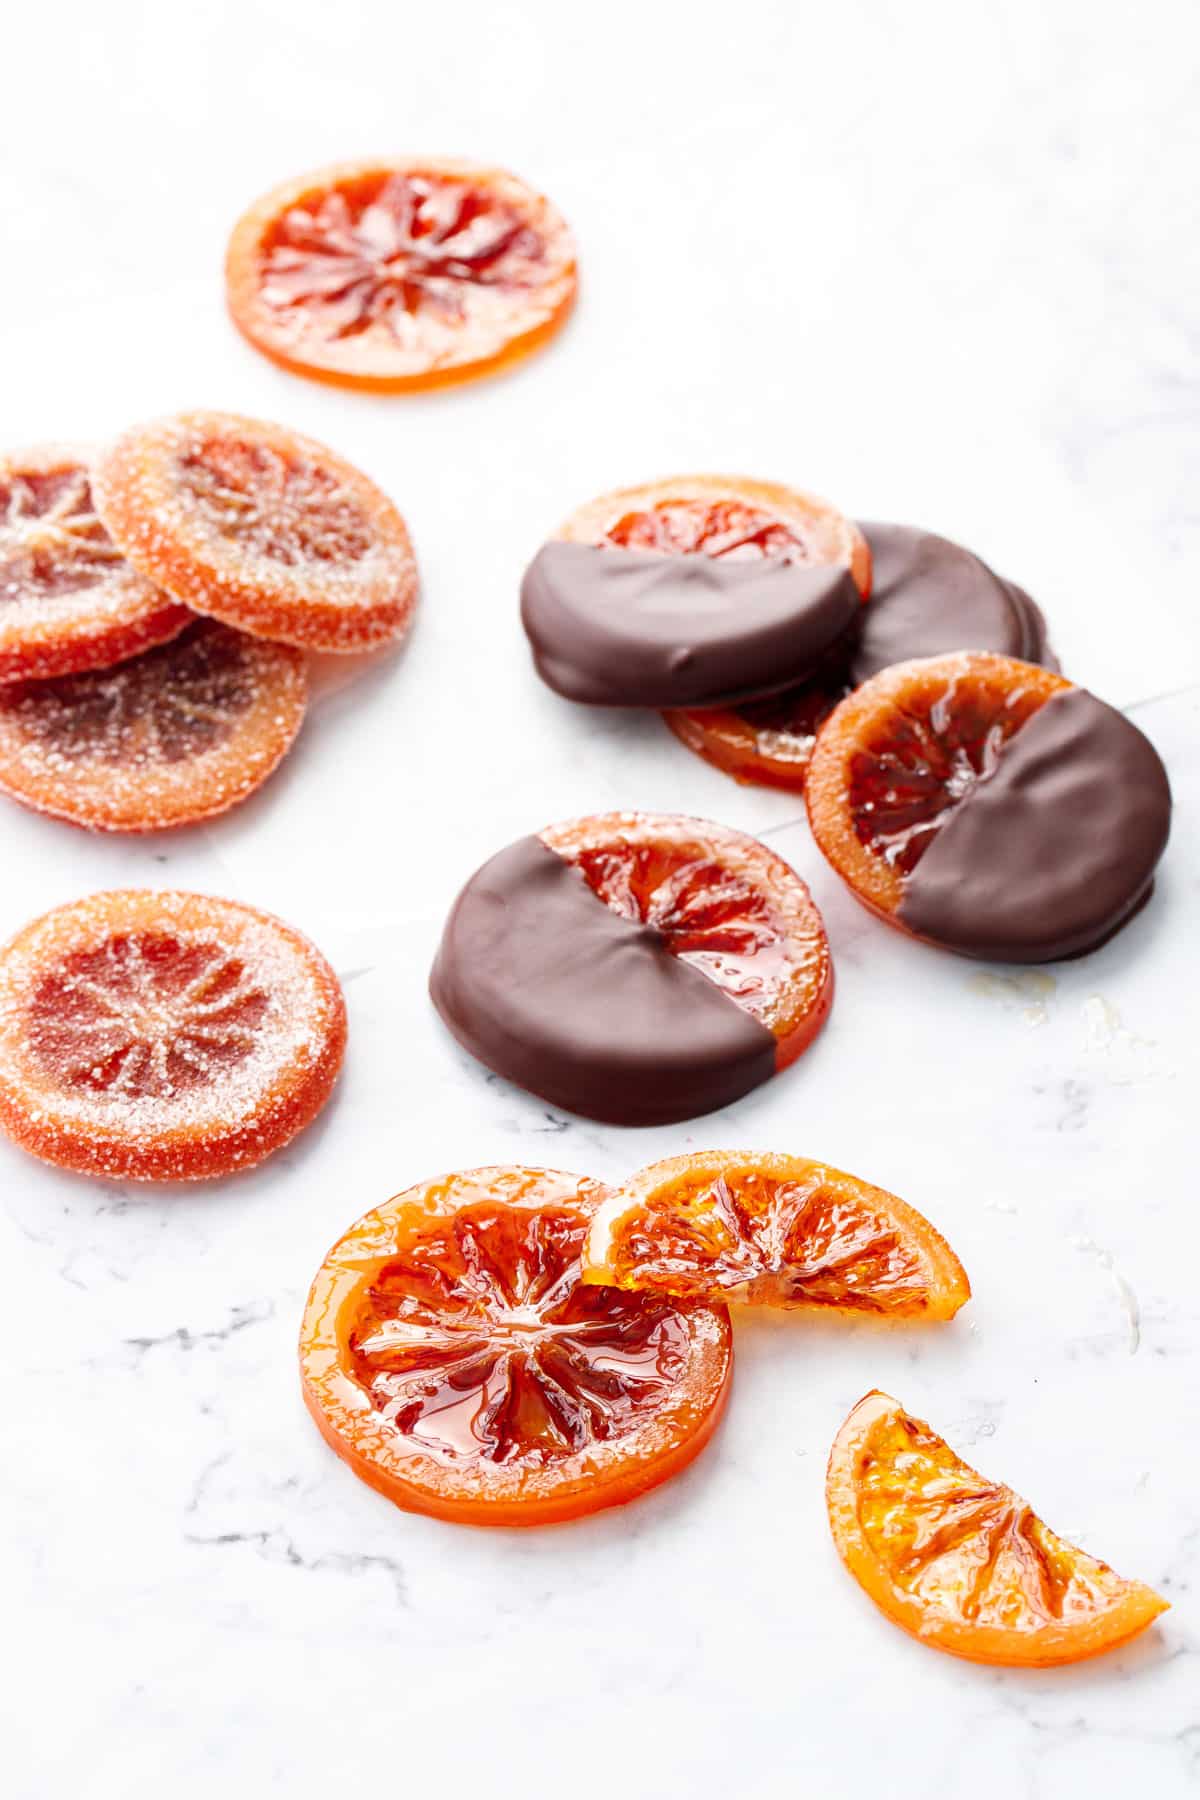 Homemade Candied Blood Orange Slices finished in 3 ways: dried and left clear and shiny, dipped in dark chocolate, and coated in granulated sugar.